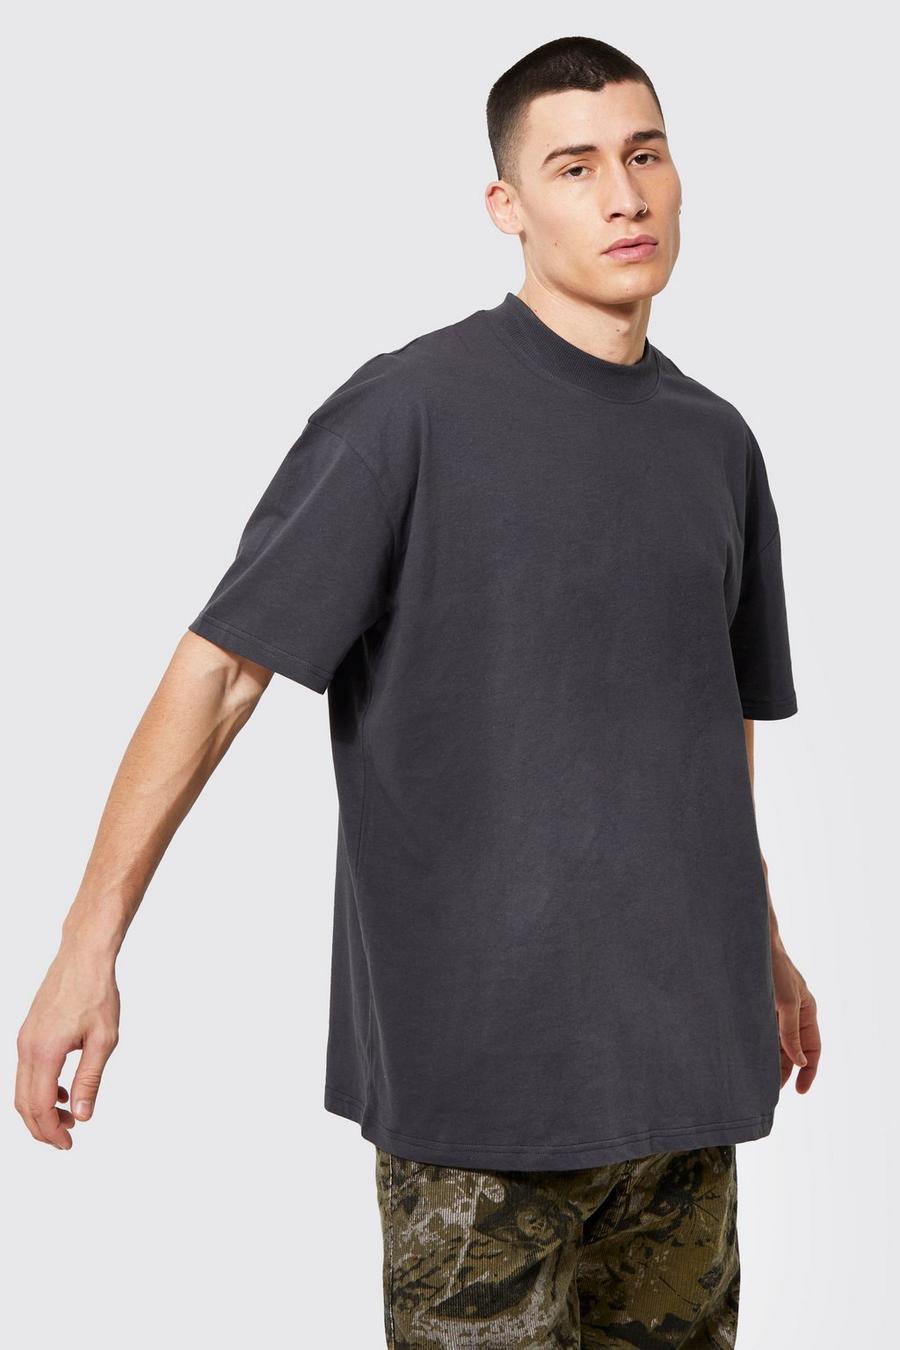 Charcoal gris Oversized Extended Neck T-Shirt